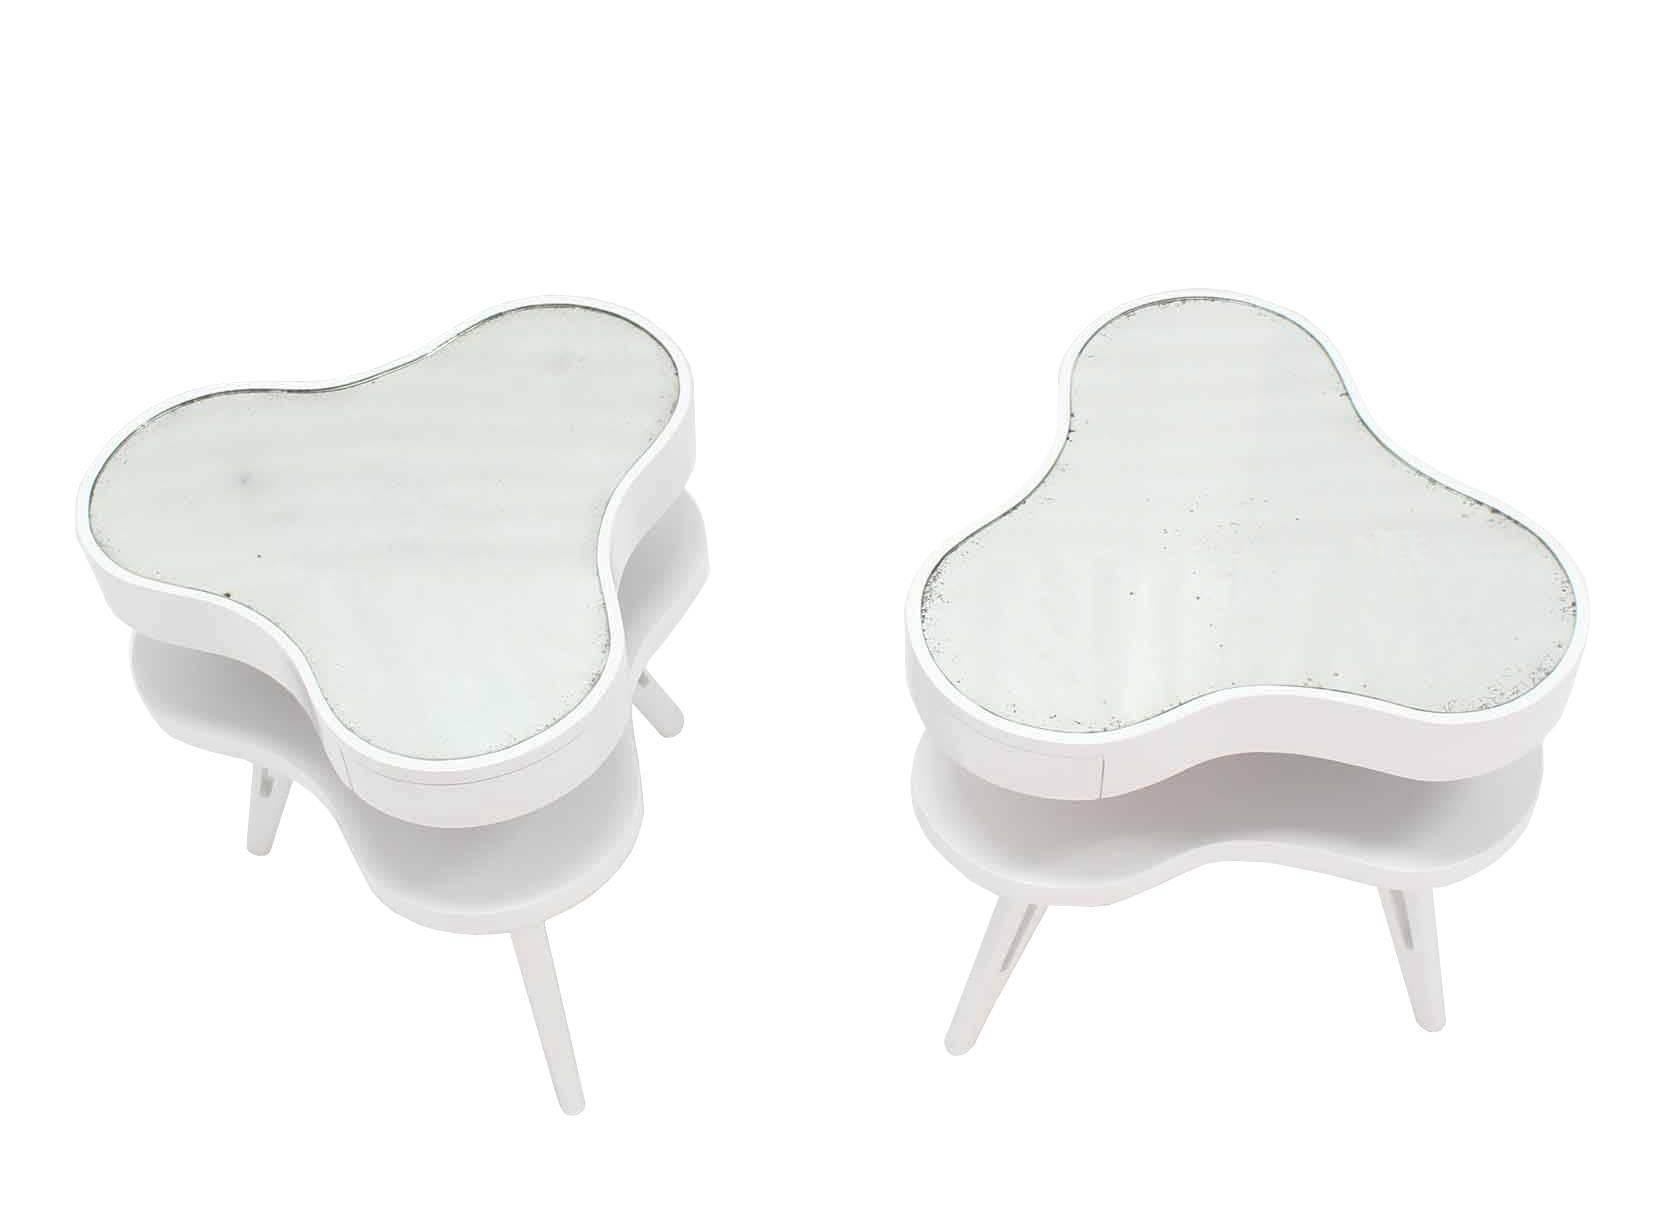 Pair of White Lacquer Pierced Legs Organic Shape End Tables In Excellent Condition For Sale In Rockaway, NJ